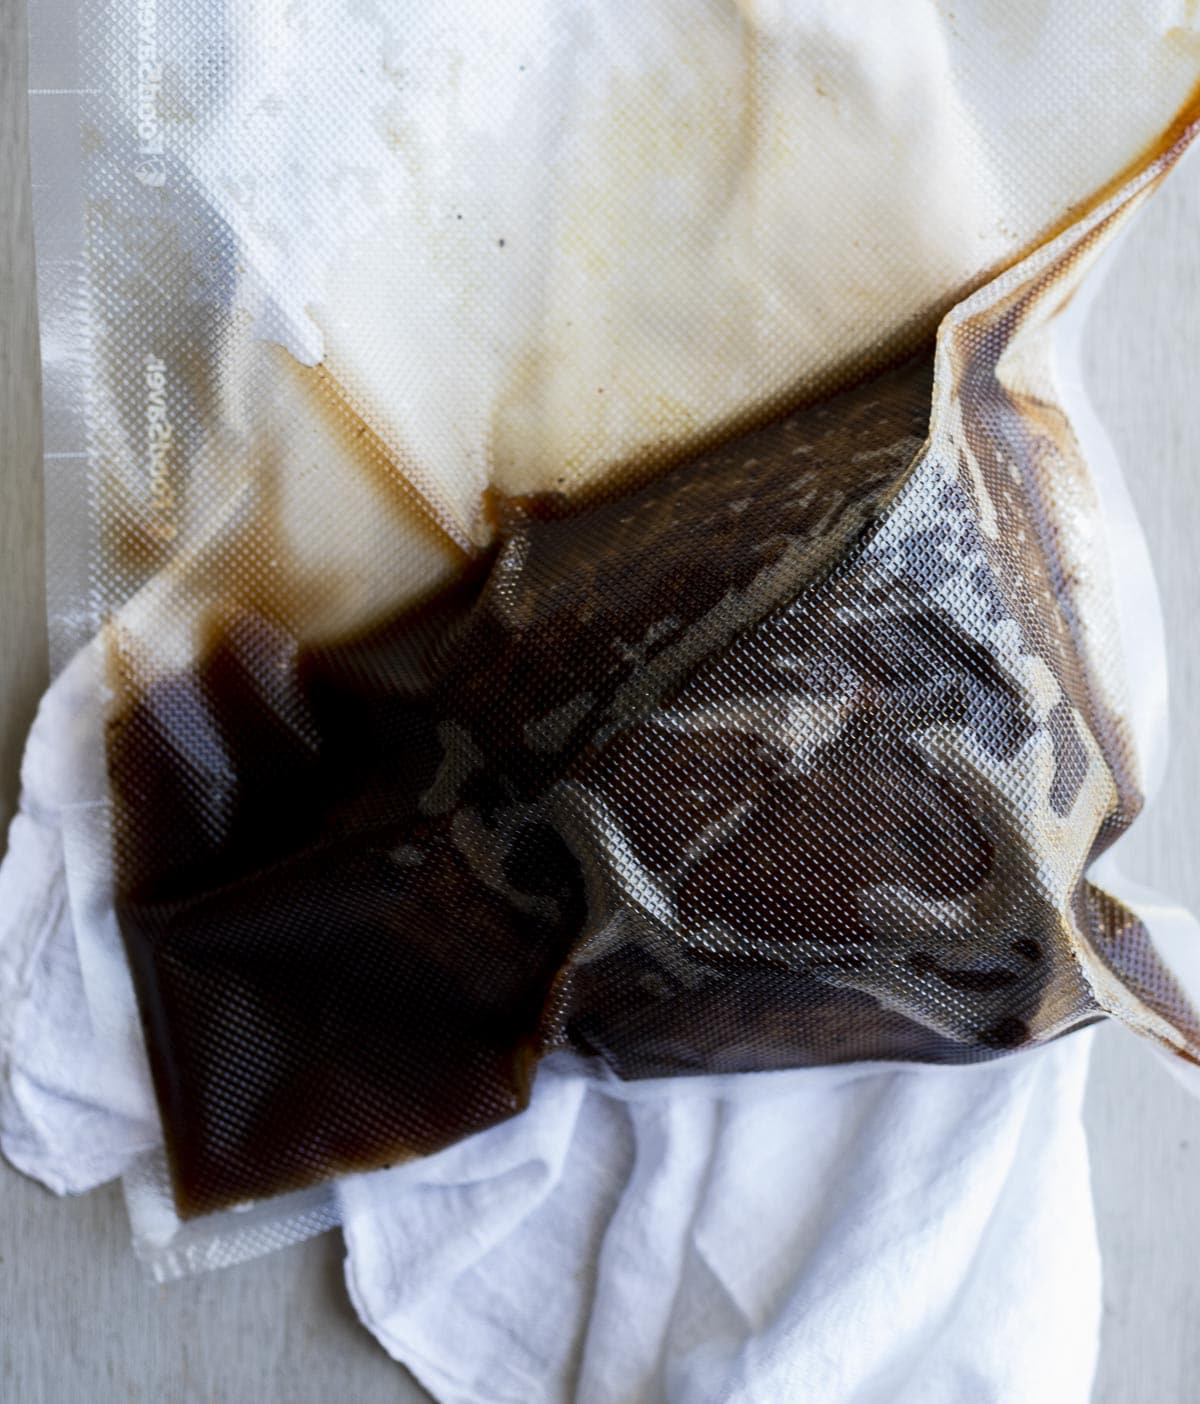 Sous vide round roast and jus in a vacuum sealed bag.